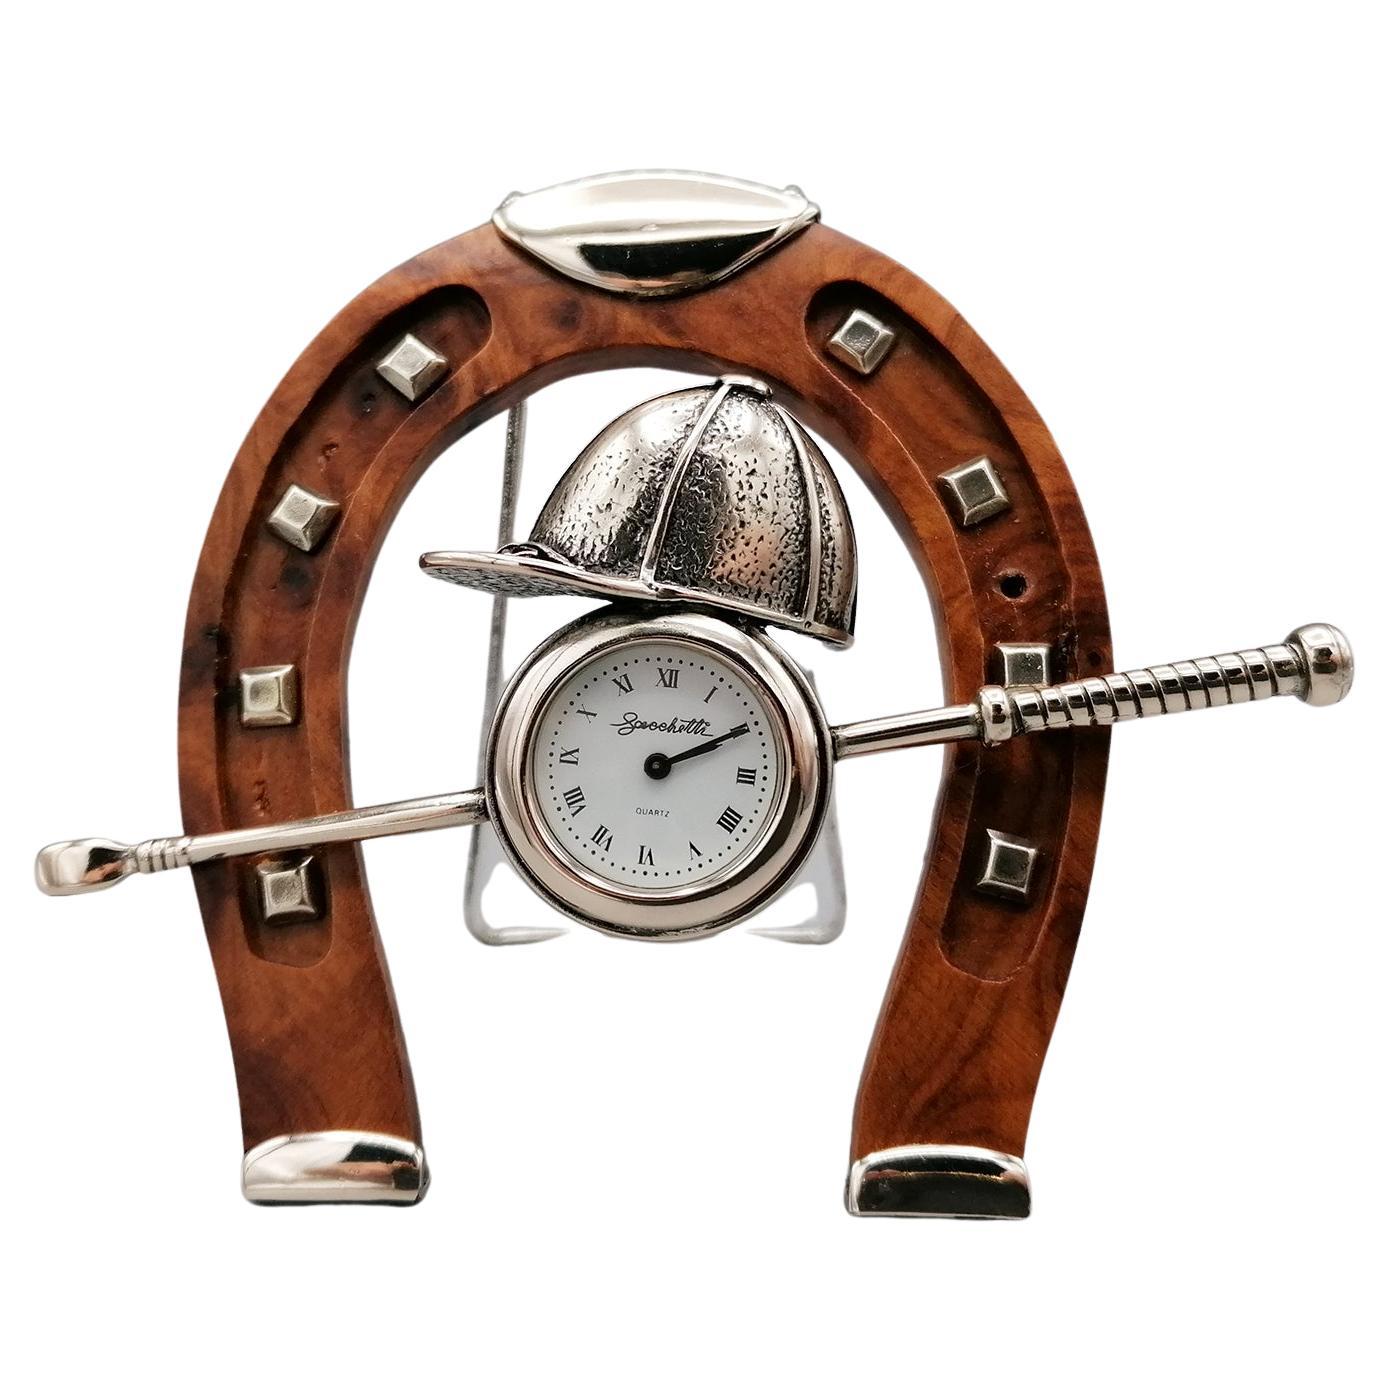 Italian Table Clock in 800 Silver and Wood Depicting Polo Game Equipment